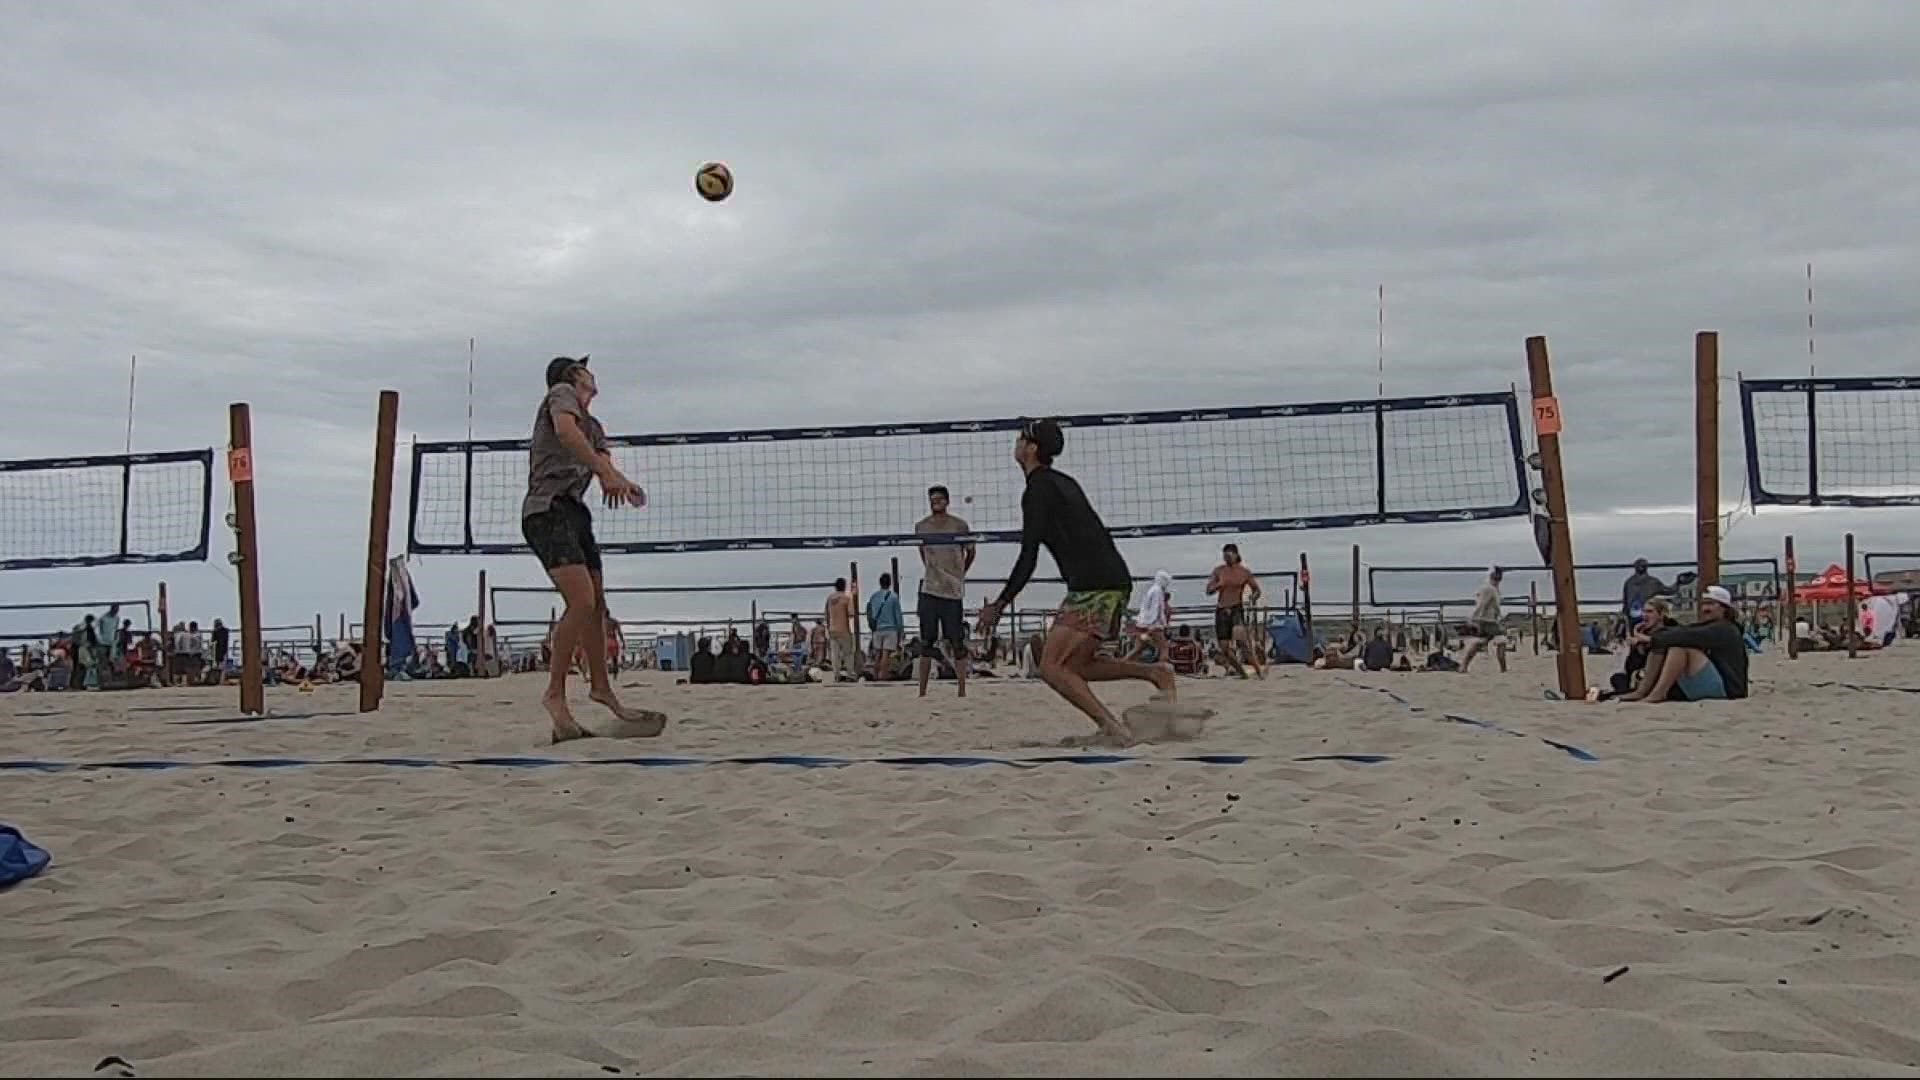 The Seaside tournament is huge despite humble beginnings. Worldwide, only one beach volleyball event in Italy is bigger.